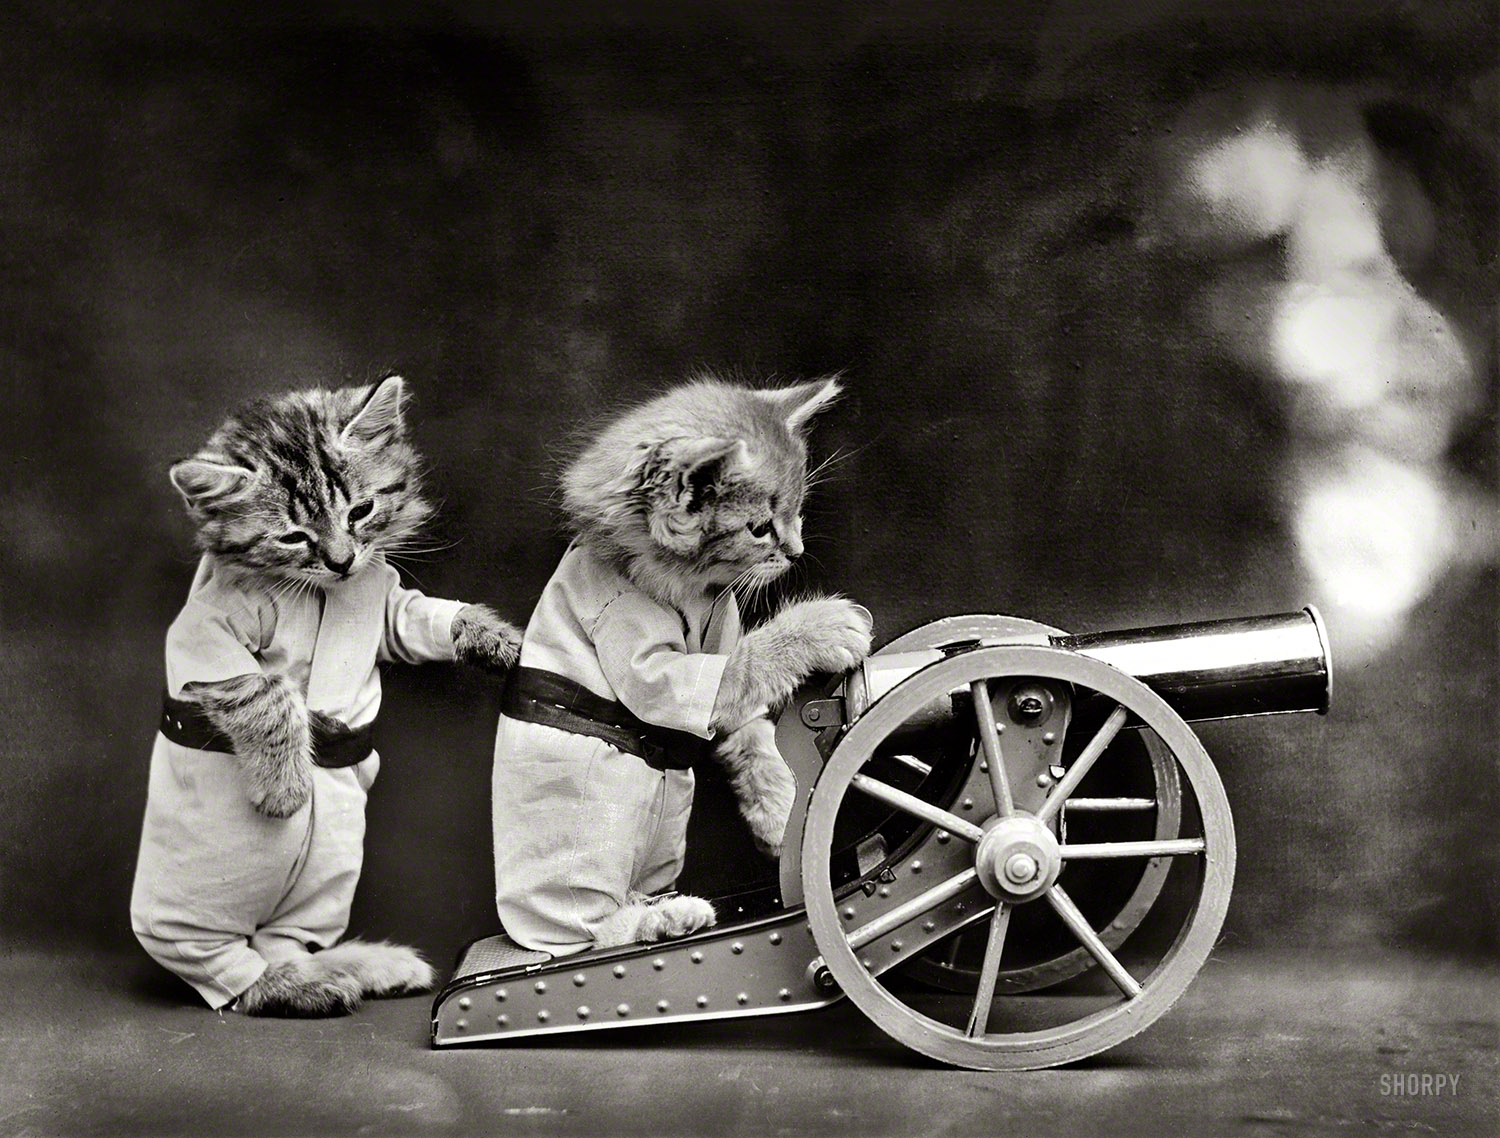 Launching a 10-pound furball into Puppy Camp!

1914. "Cats in coveralls, posed as if firing a toy cannon." It looks like nappy-time for Bottom Gun. Photo by Harry W. Frees. View full size.